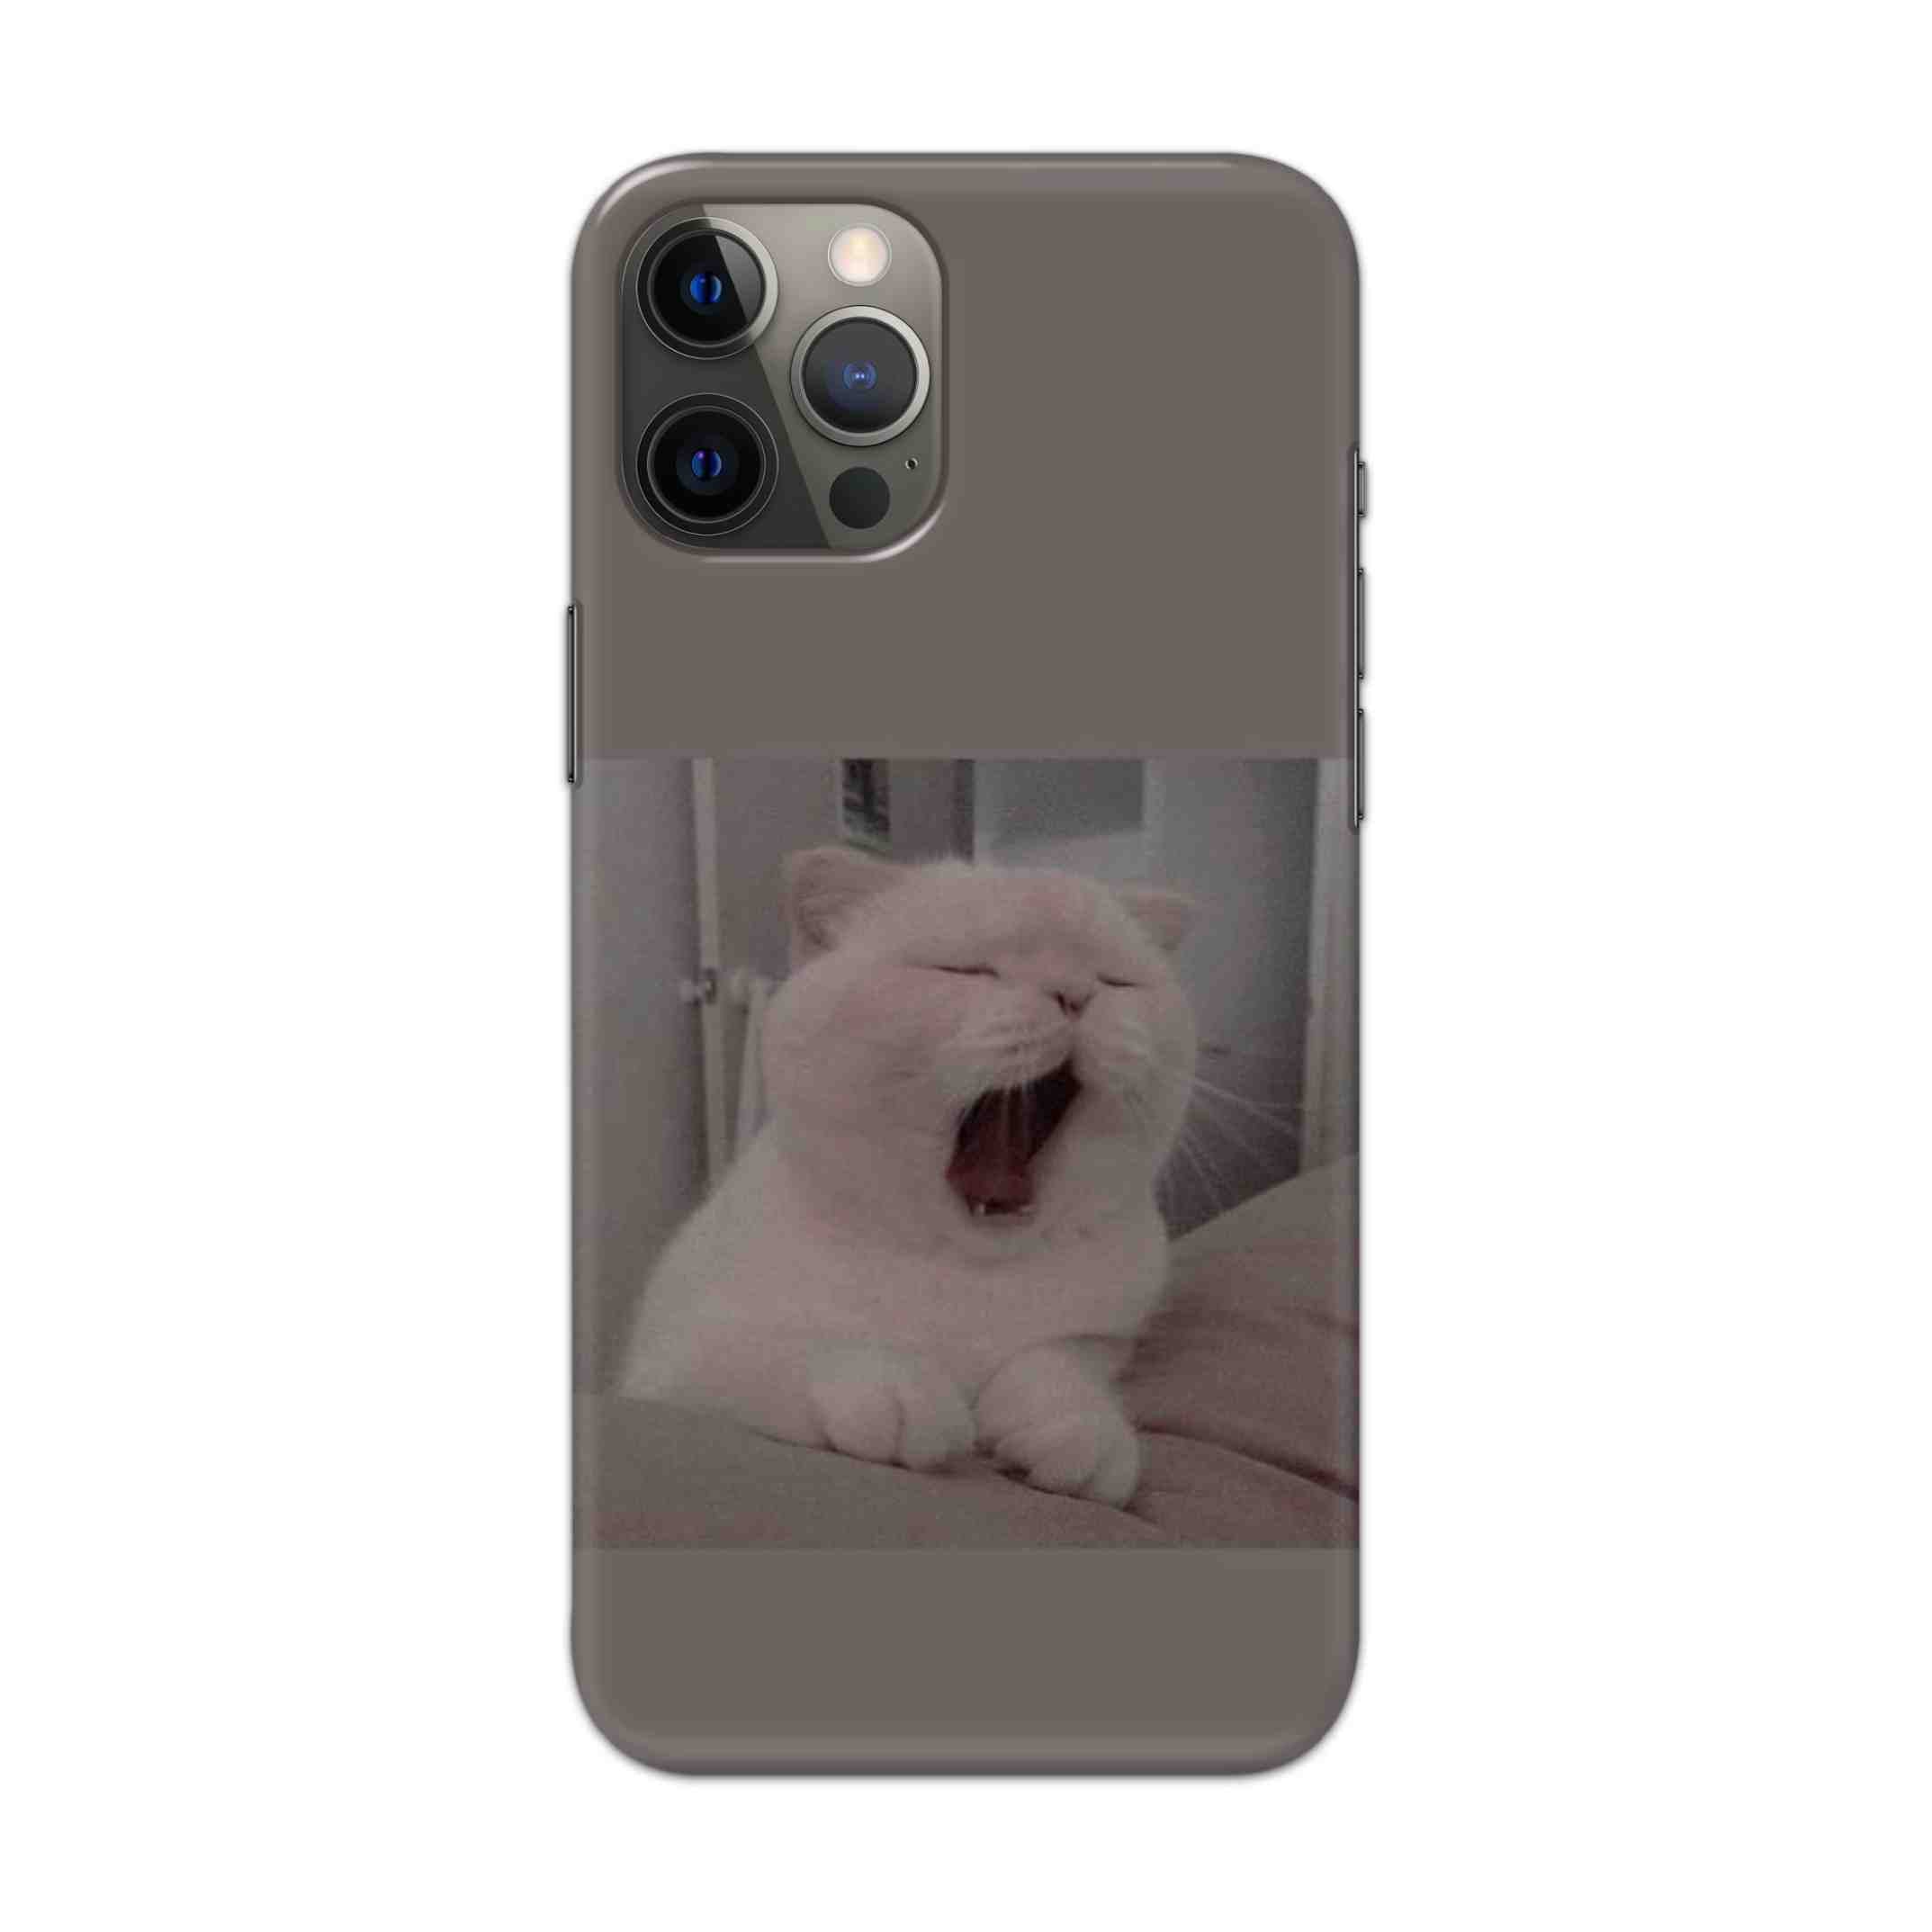 Buy Cute Cat Hard Back Mobile Phone Case Cover For Apple iPhone 12 pro max Online